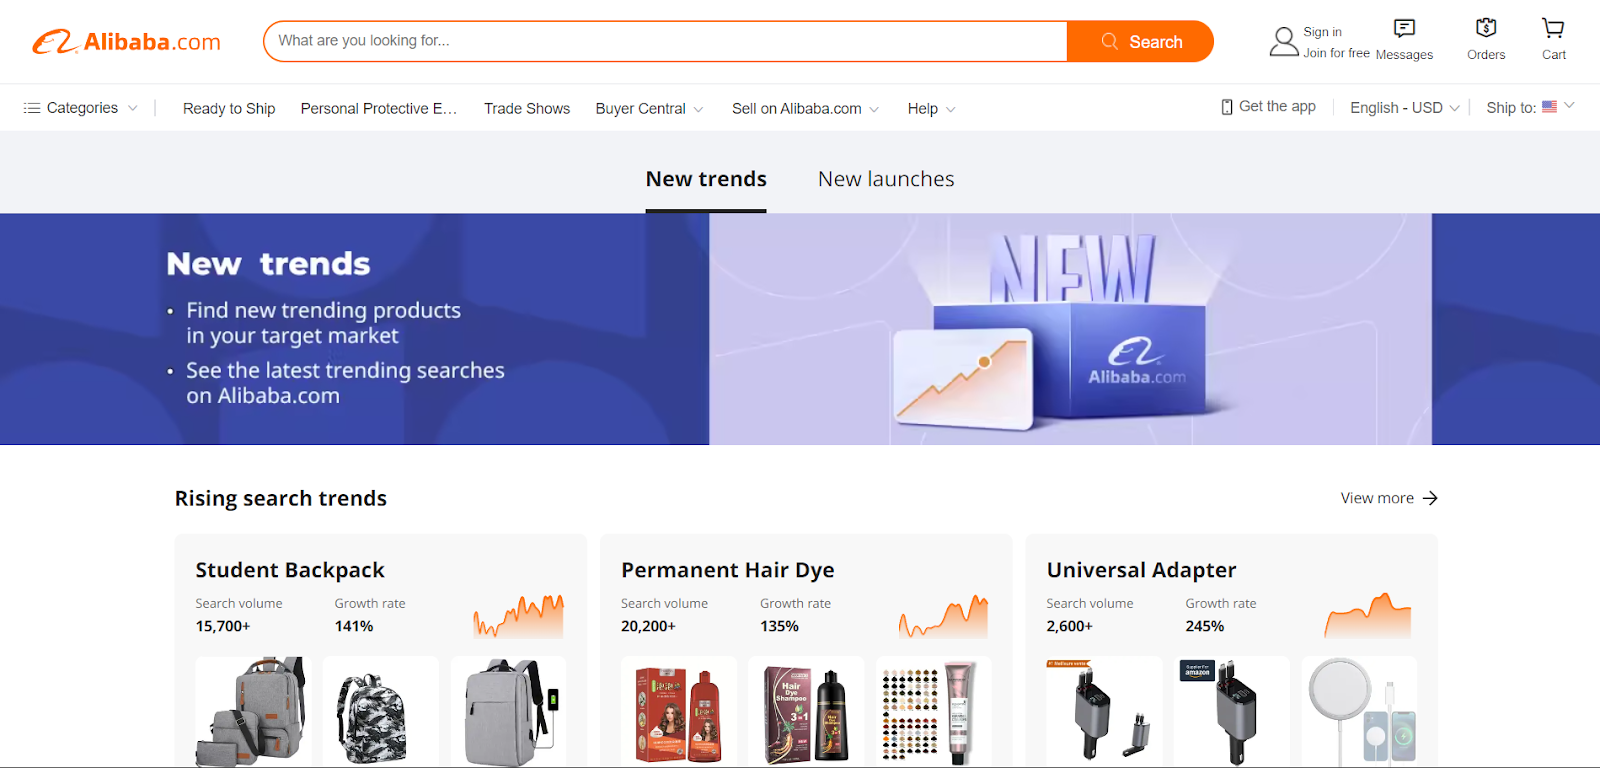 omnichannel retail examples alibaba 3